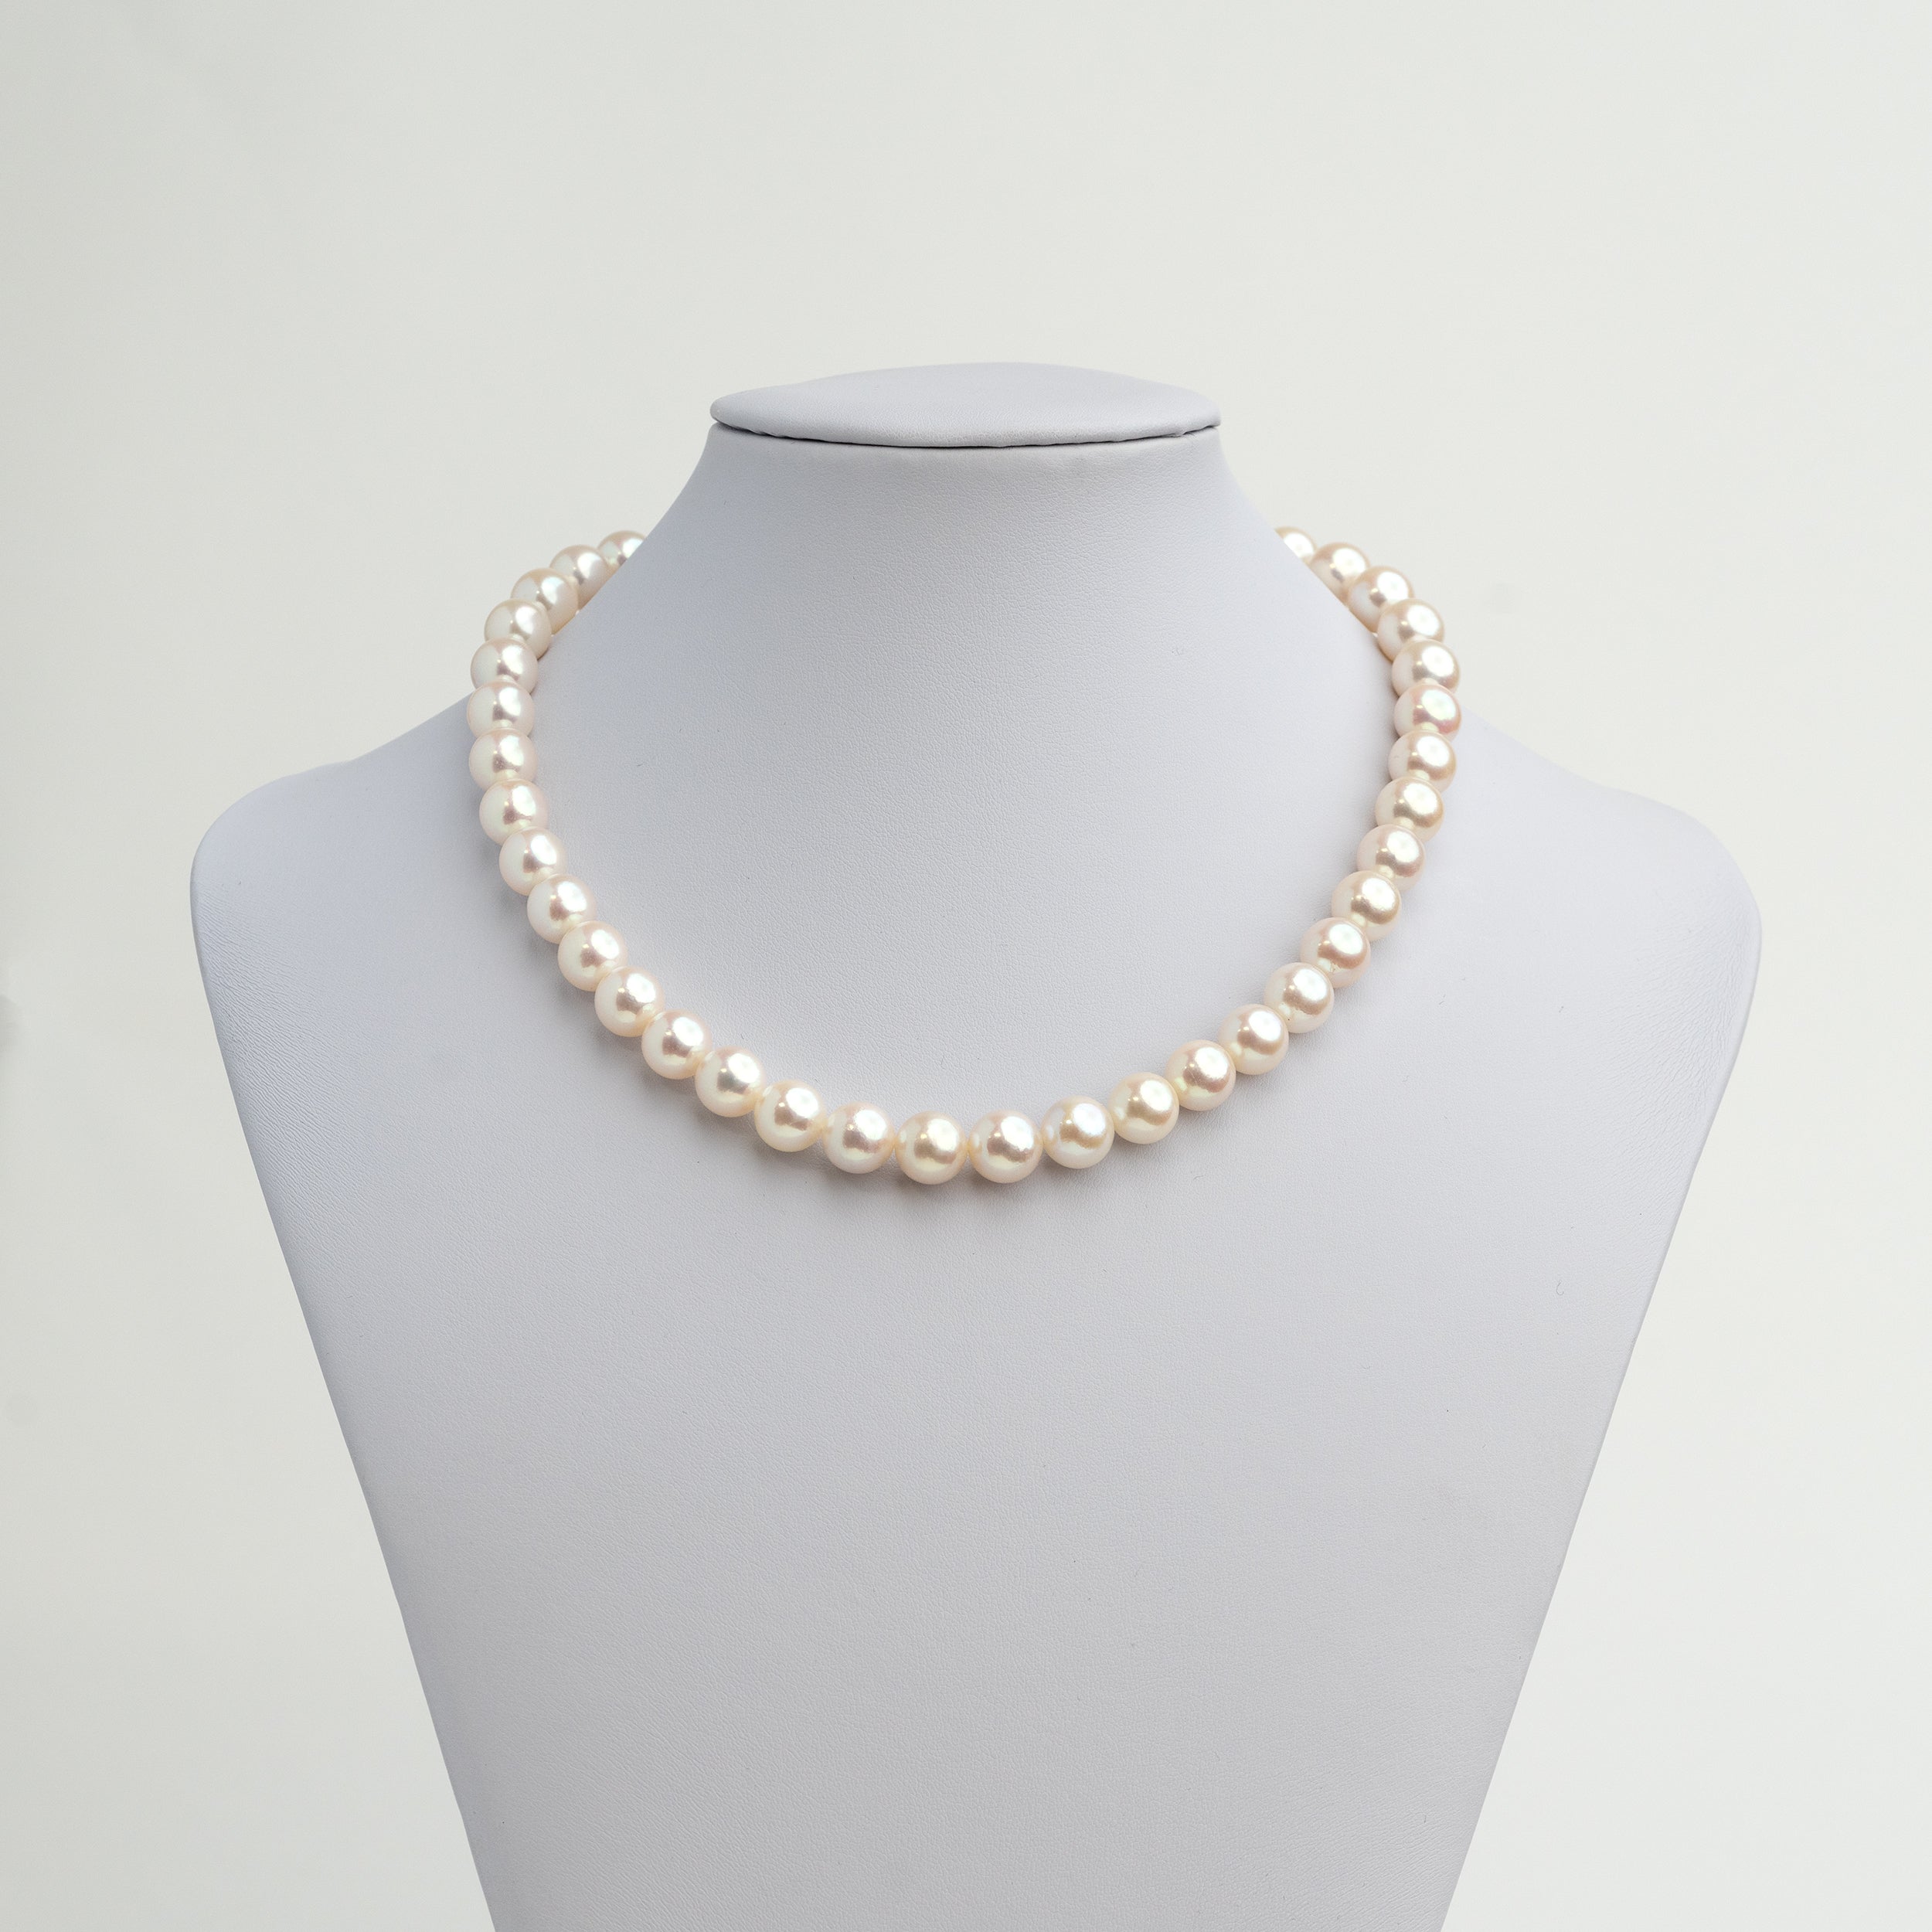 Japanese Akoya Cultured Pearl Necklace 9.5 - 10mm S&Y Signature | 45cm